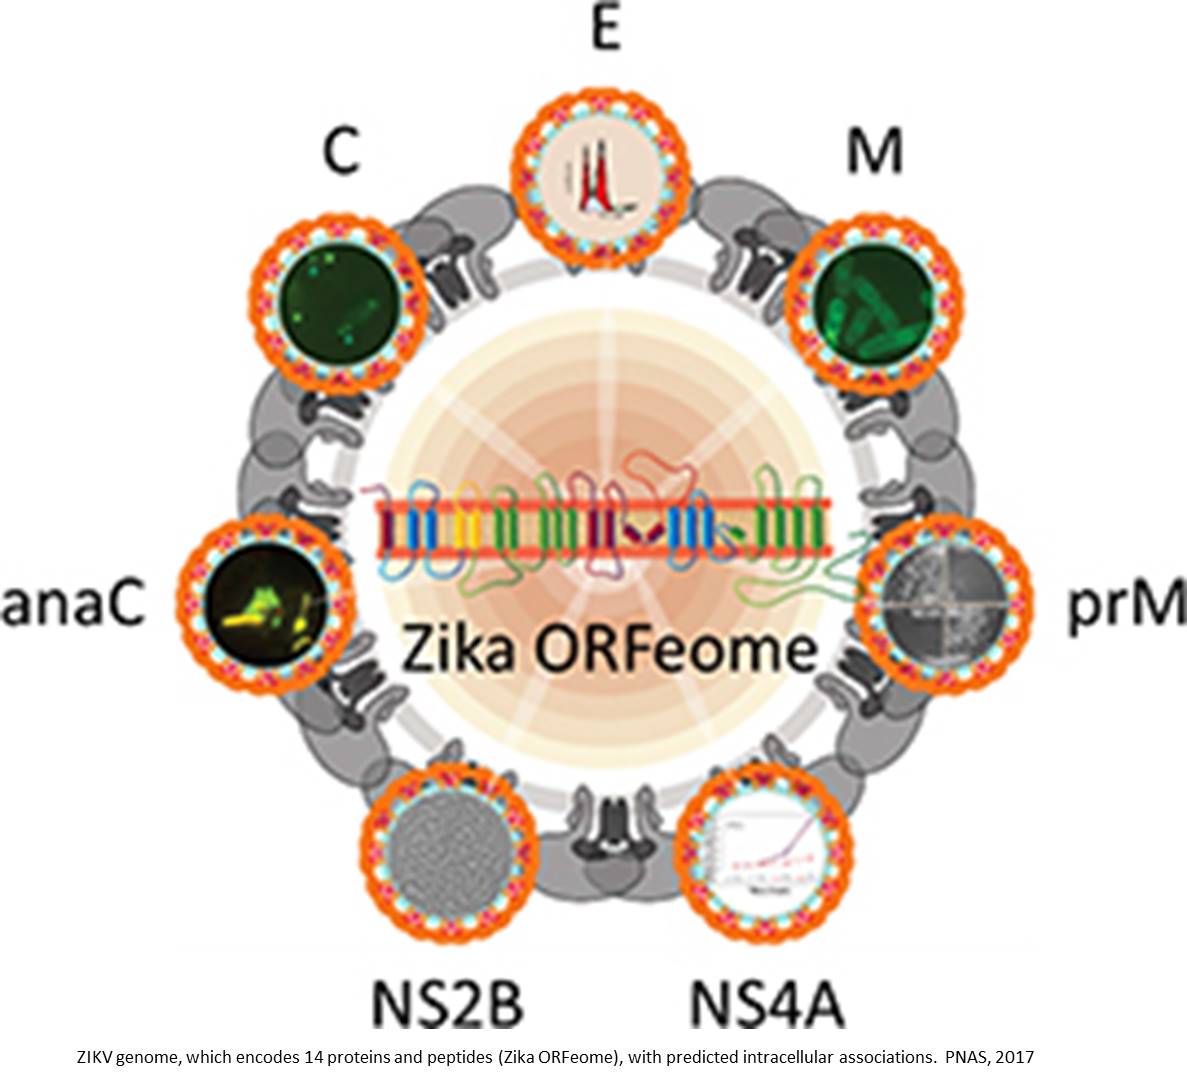 Cytopathic effects of Zika virus proteins